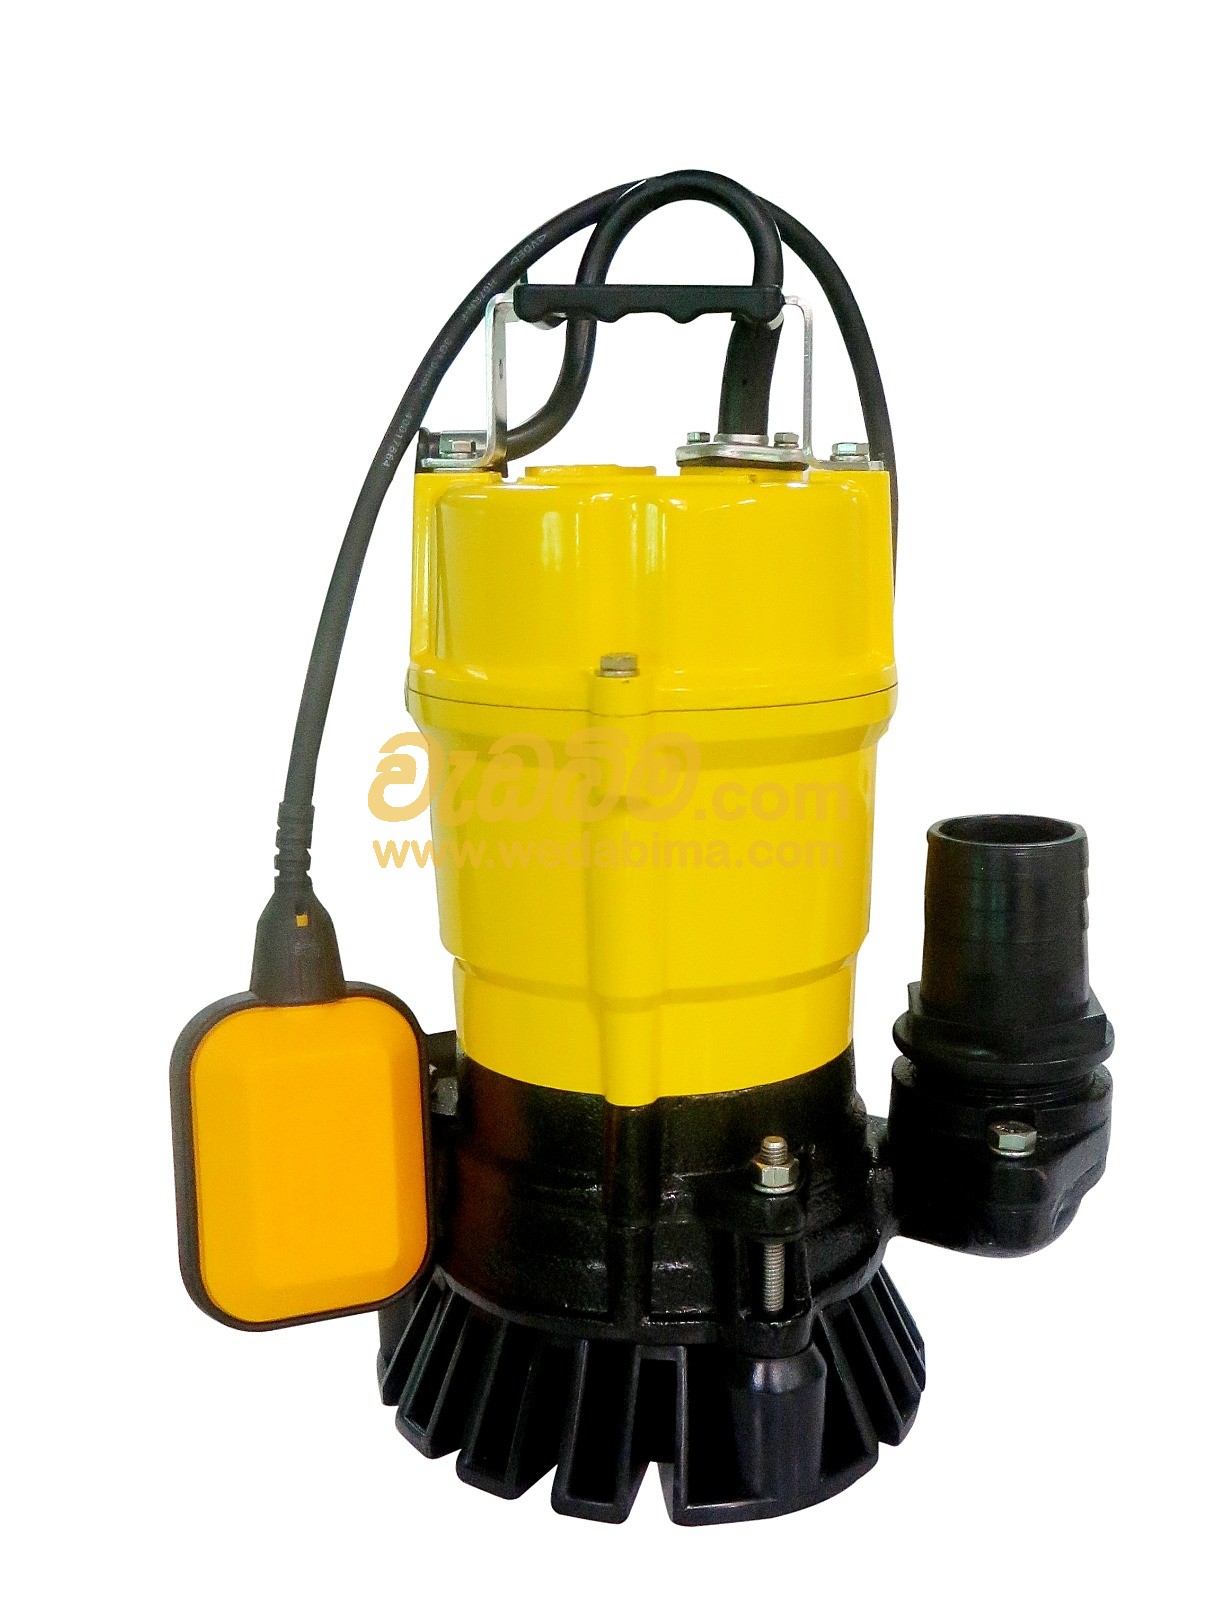 Submersible Pump for sale in sri lanka